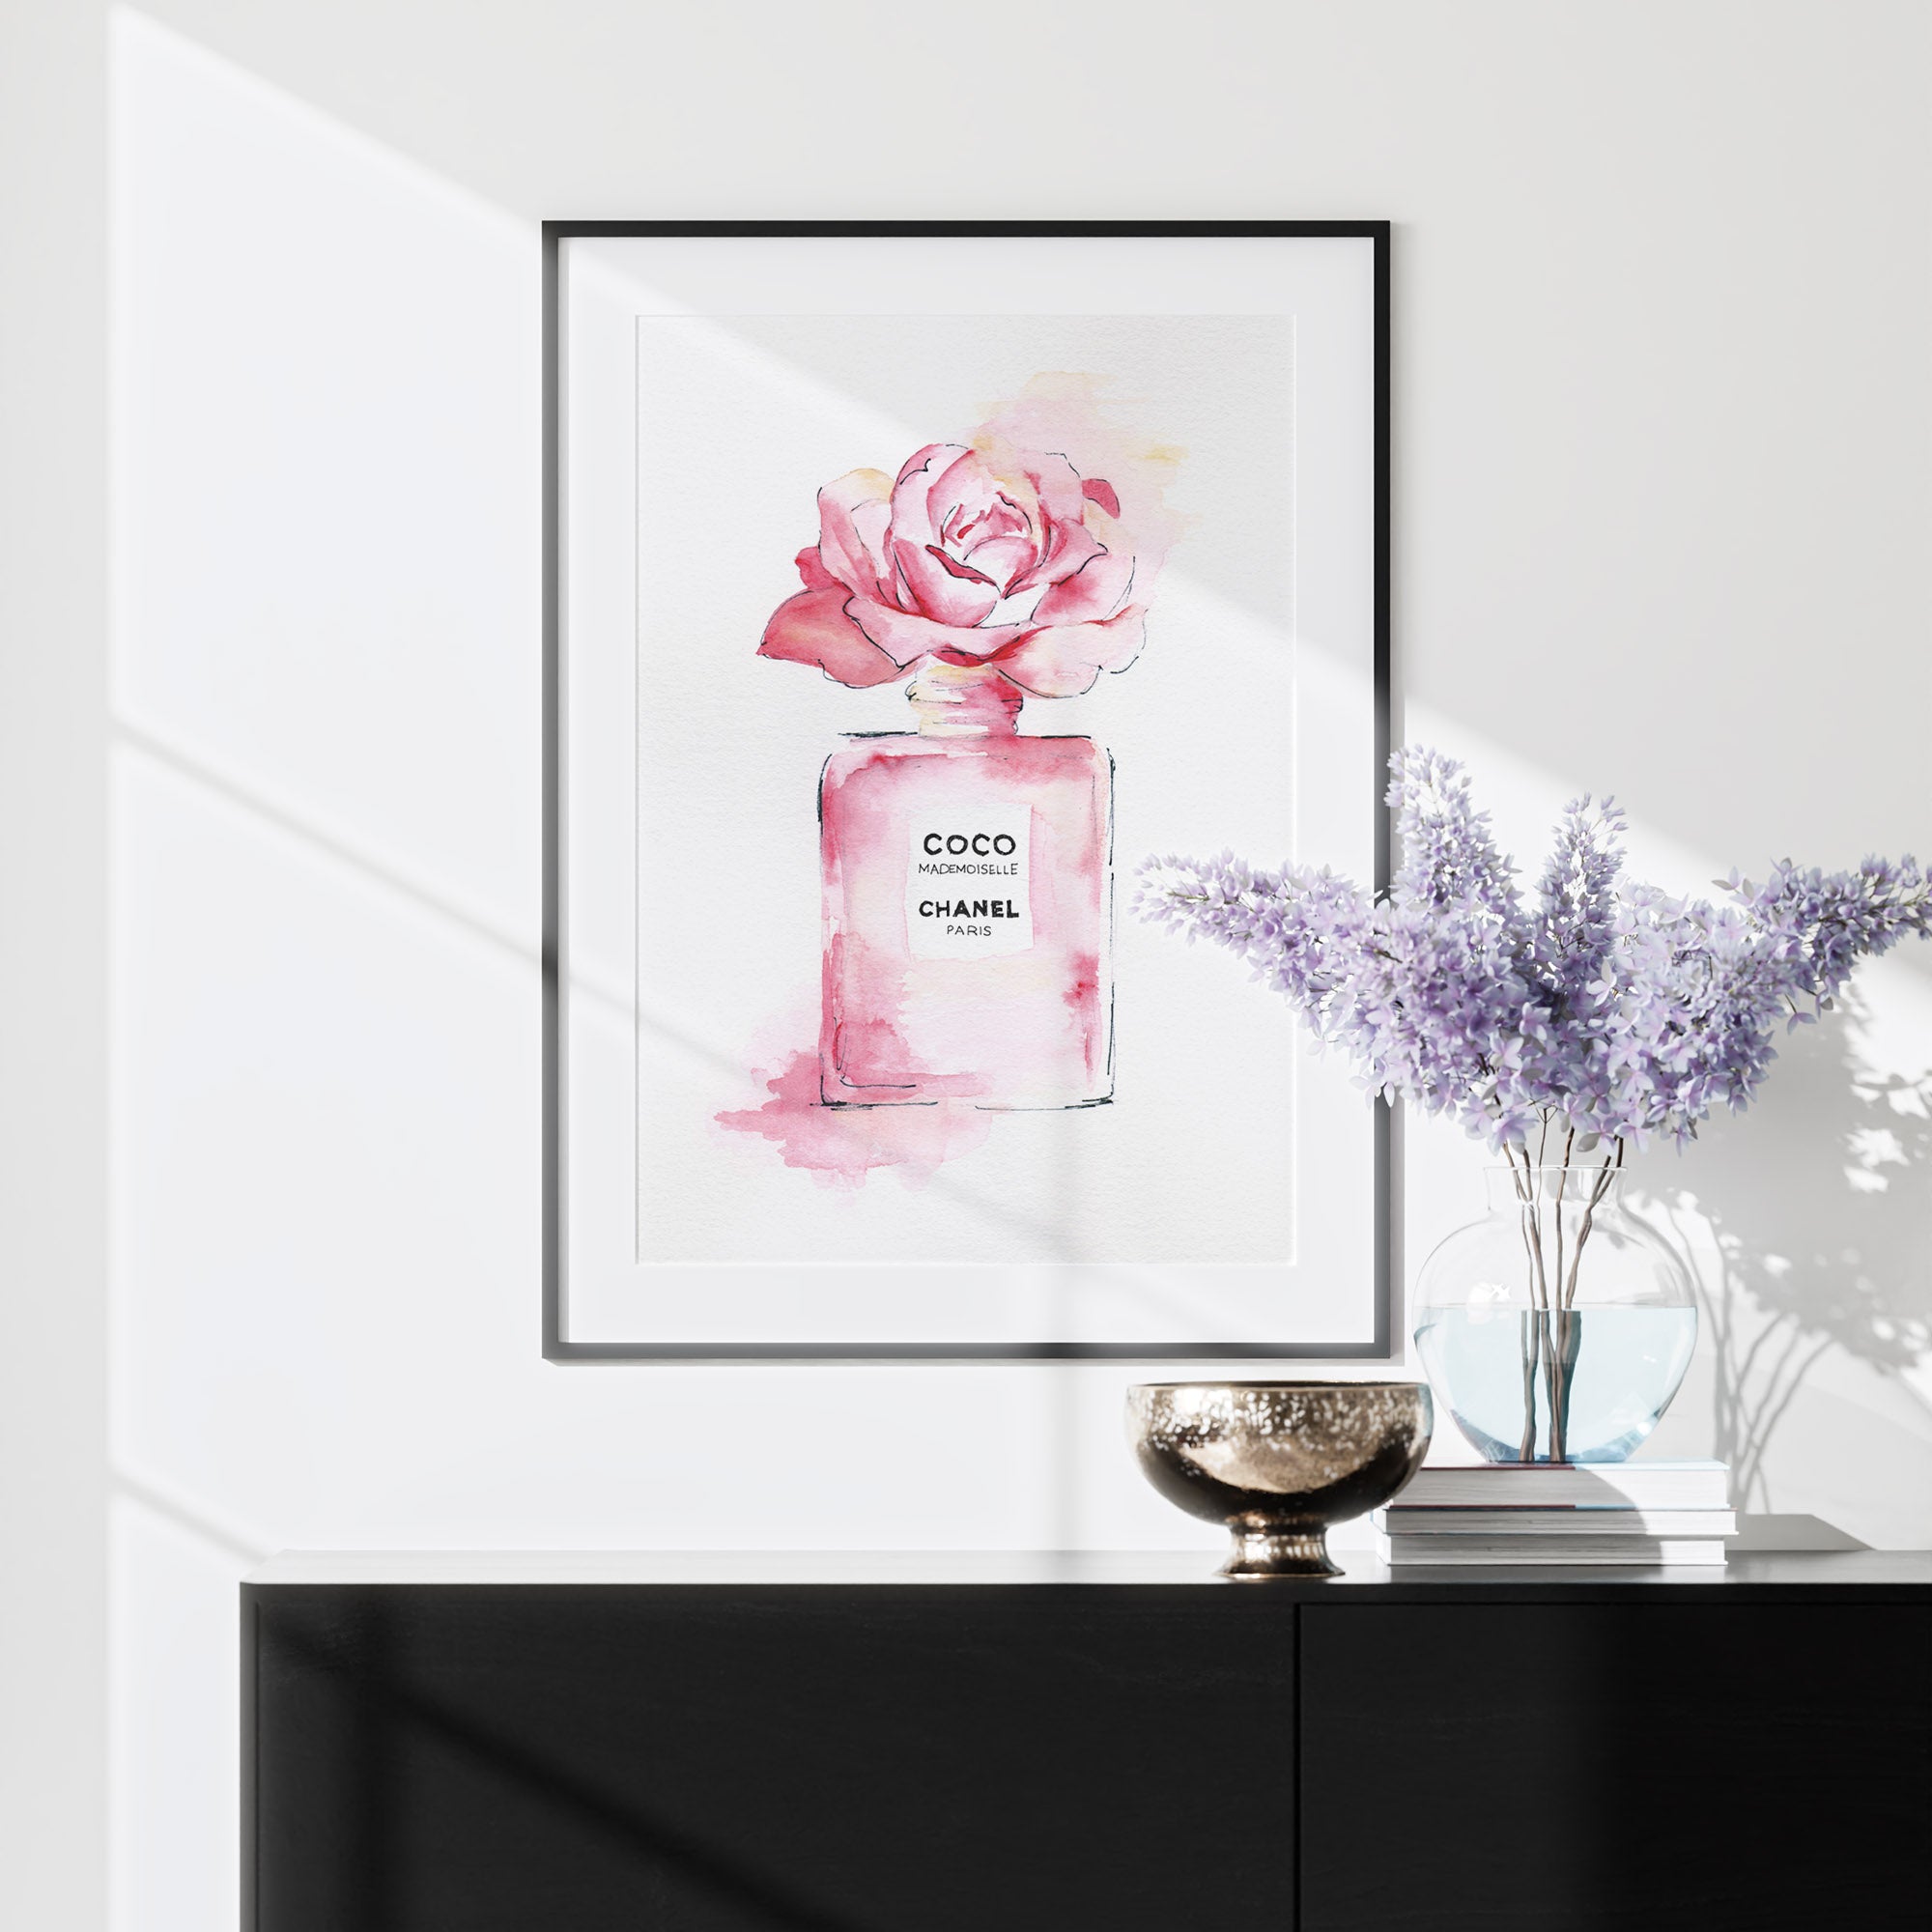 Chanel wall art featuring a Coco Mademoiselle perfume bottle